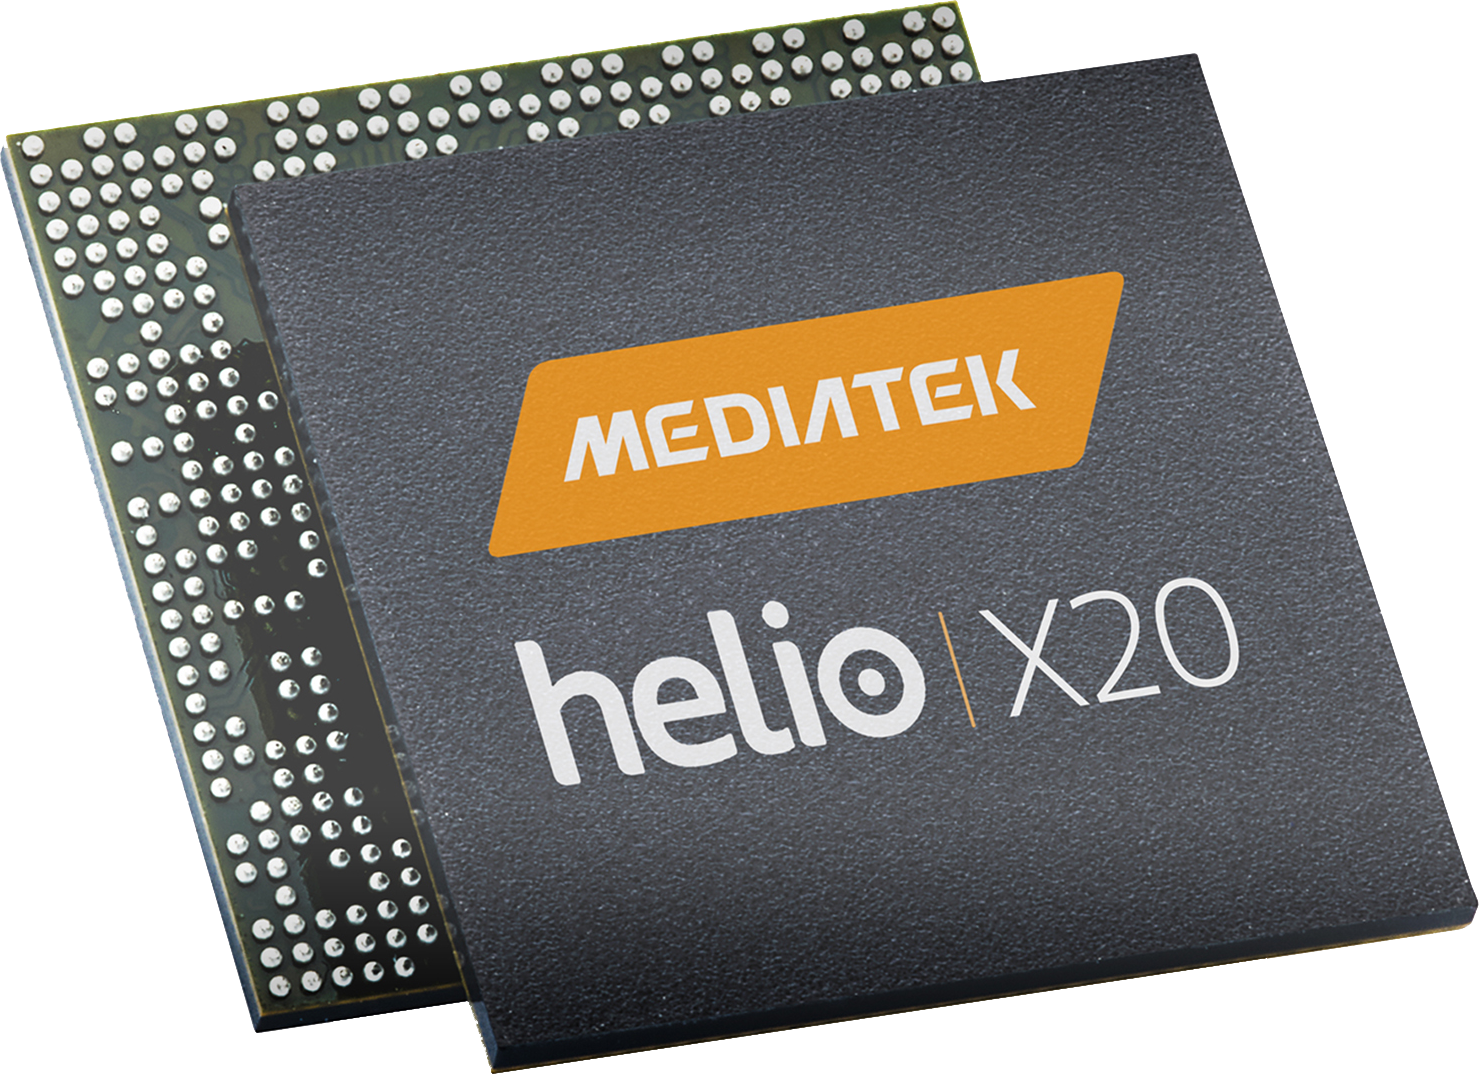 MediaTek announces the Helio X20 – World’s first 10 core SoC with Tri-cluster CPU